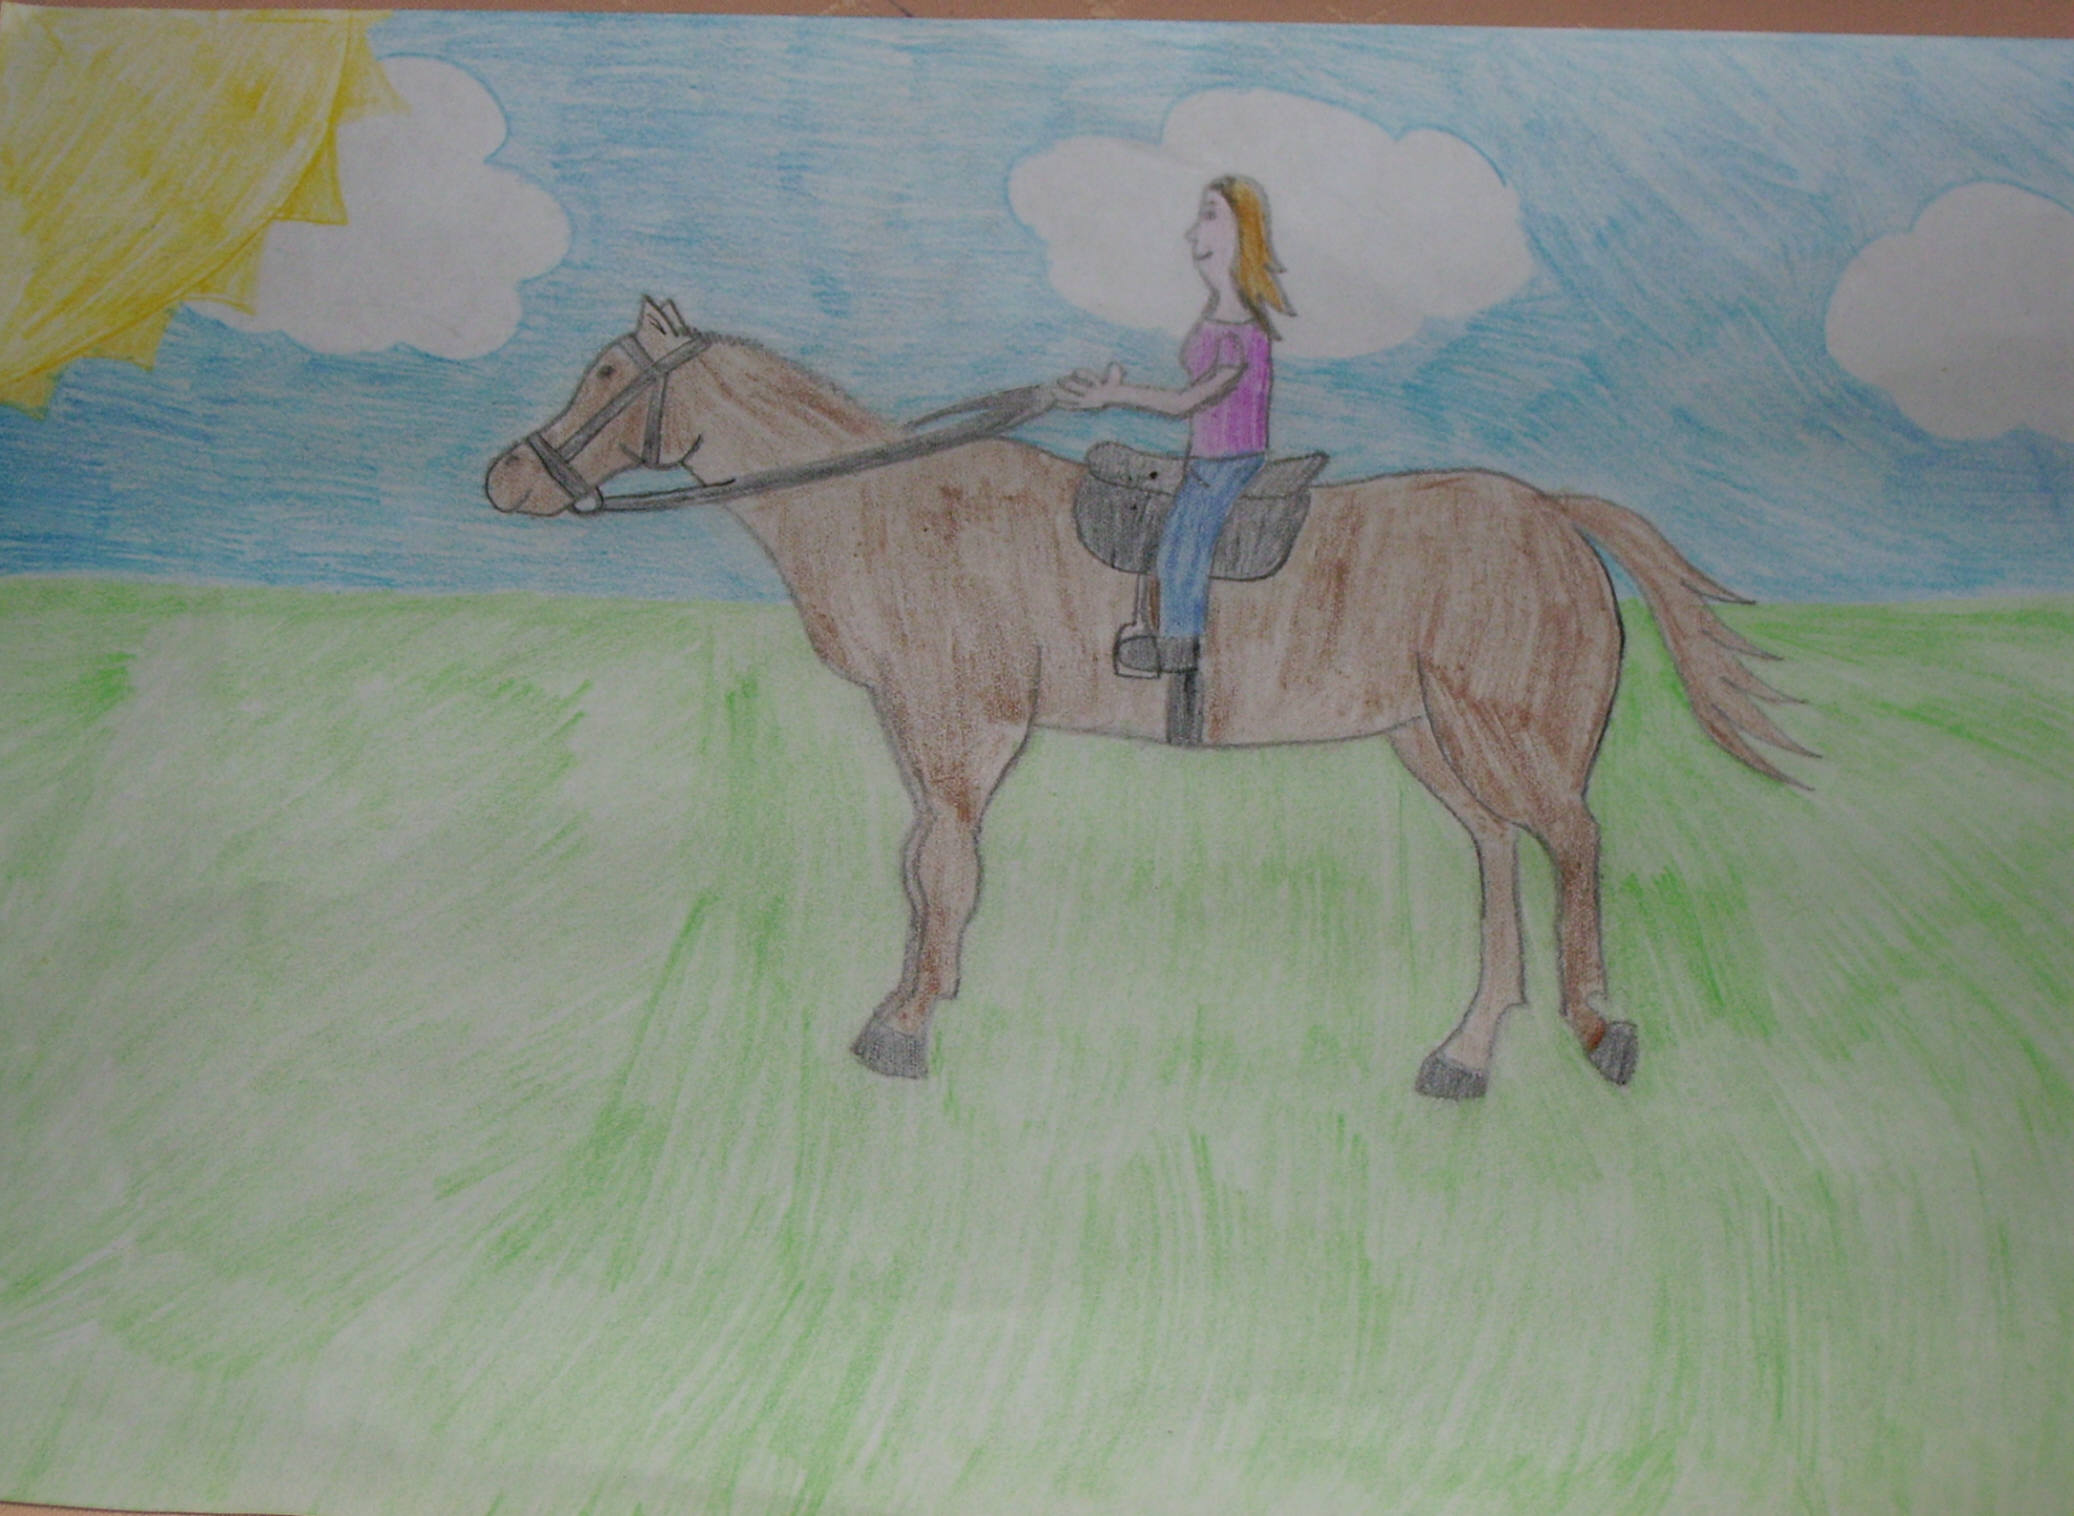 me riding a horse by bambi101